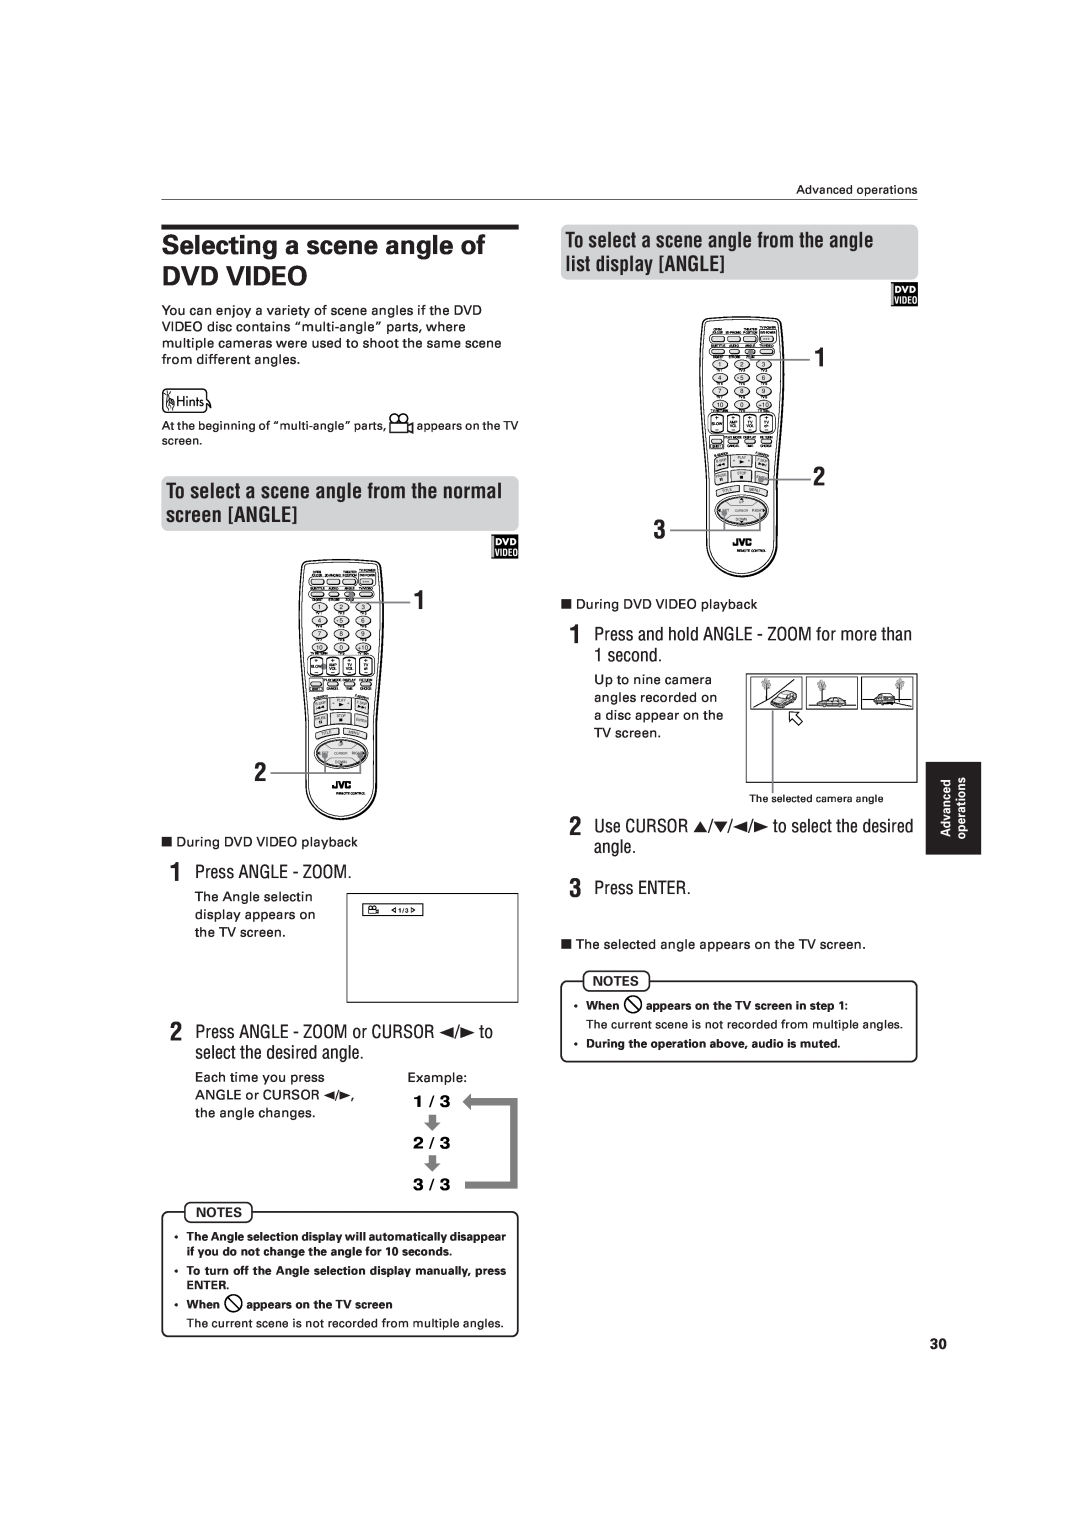 JVC XV-521BK manual Selecting a scene angle of DVD VIDEO, To select a scene angle from the normal screen ANGLE, Press ENTER 